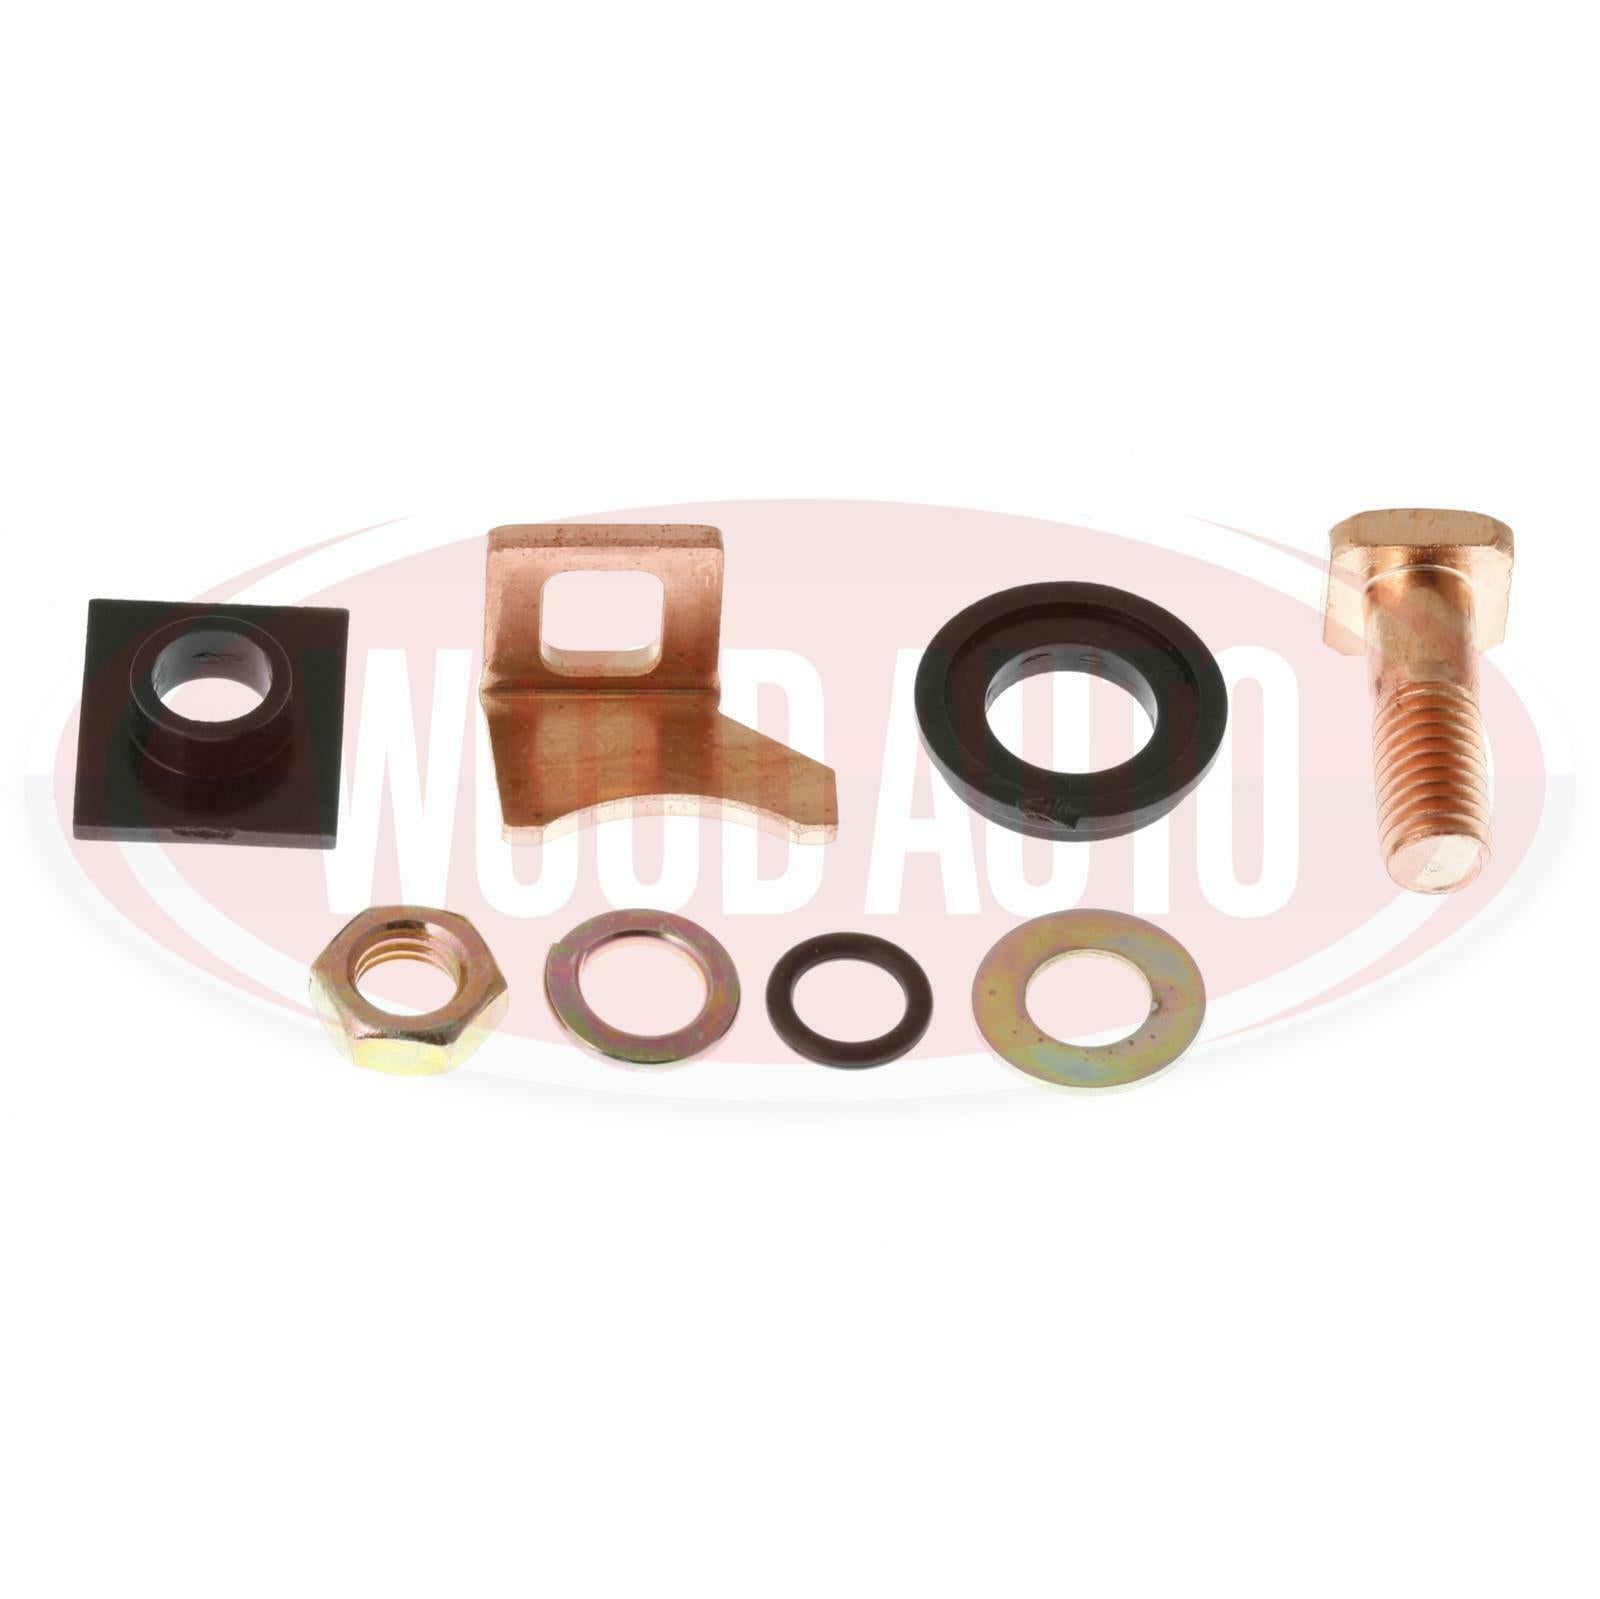 Starter Solenoid Contact Kit Nippon Denso Cargo 135384 - Mid-Ulster Rotating Electrics Ltd